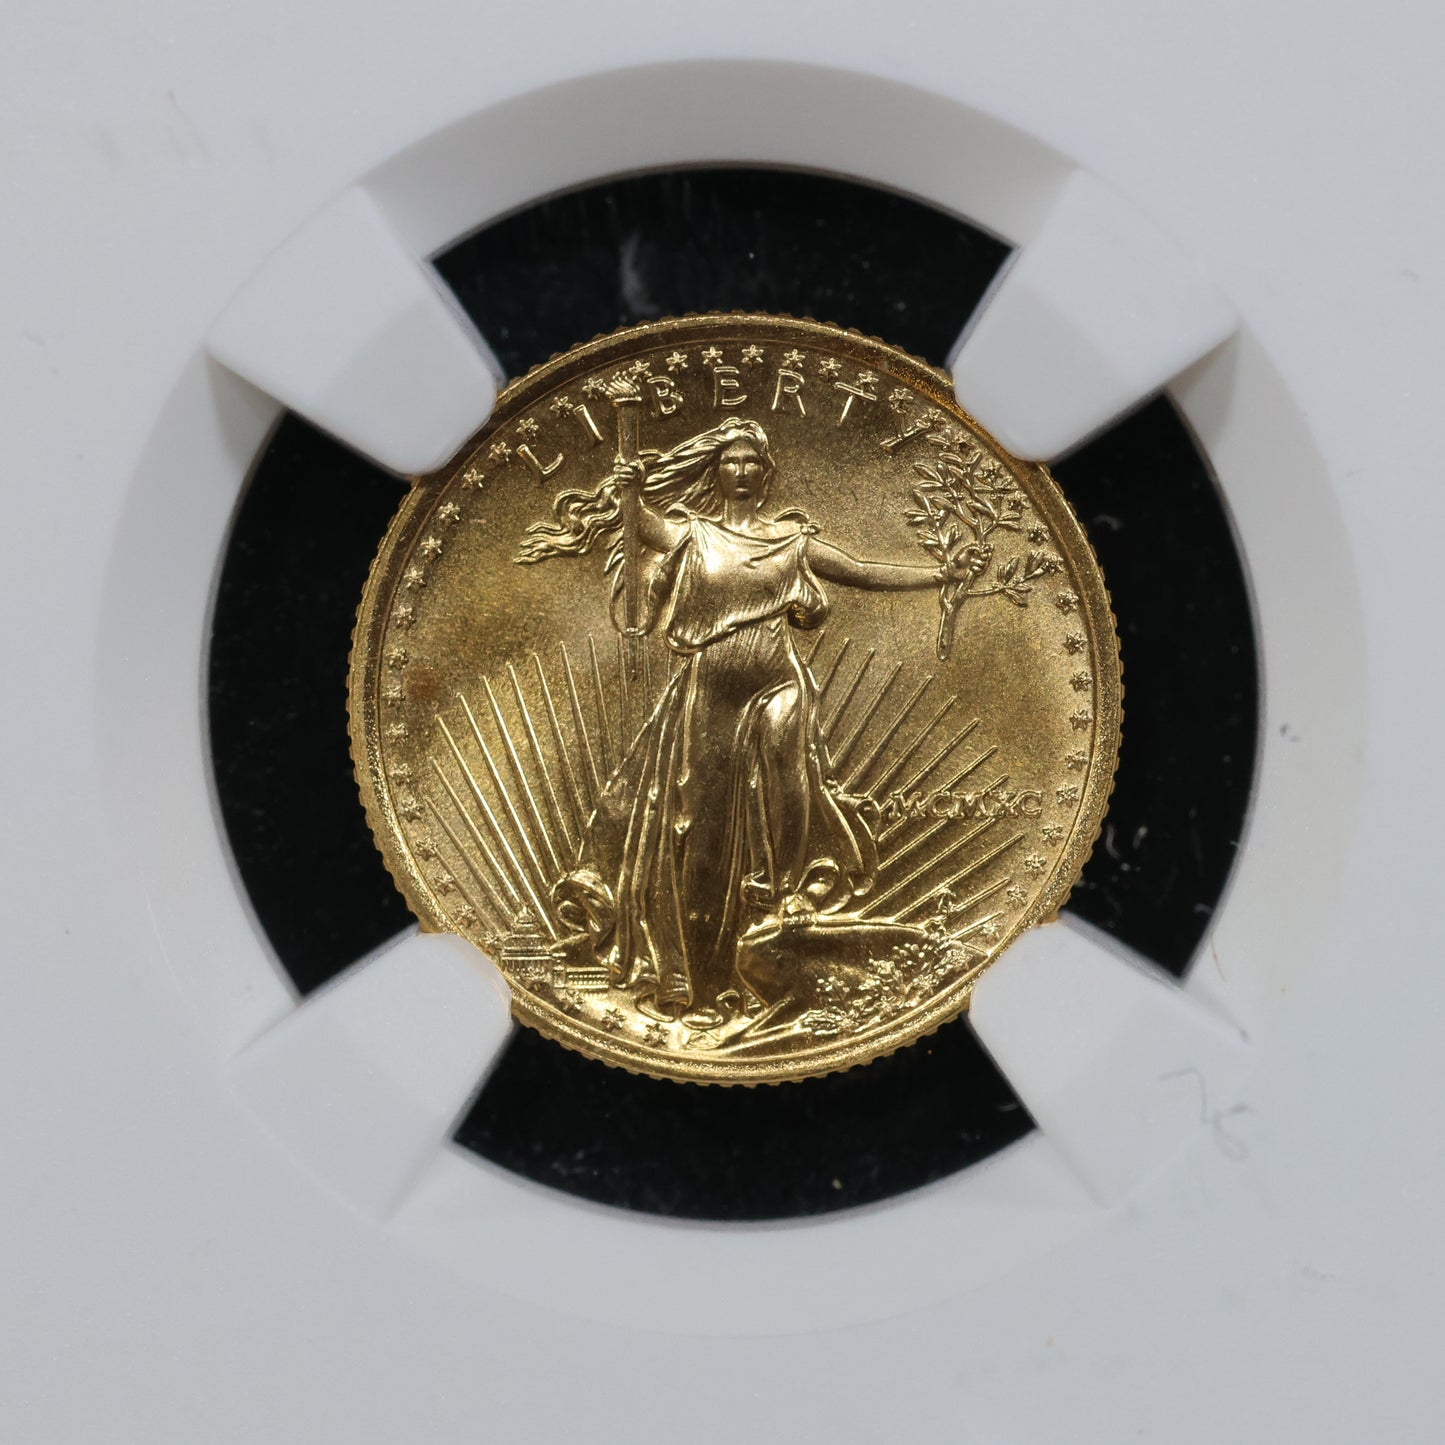 1990 1/10 oz Gold American Eagle 5$ Bullion Gold Coin - NGC MS 69